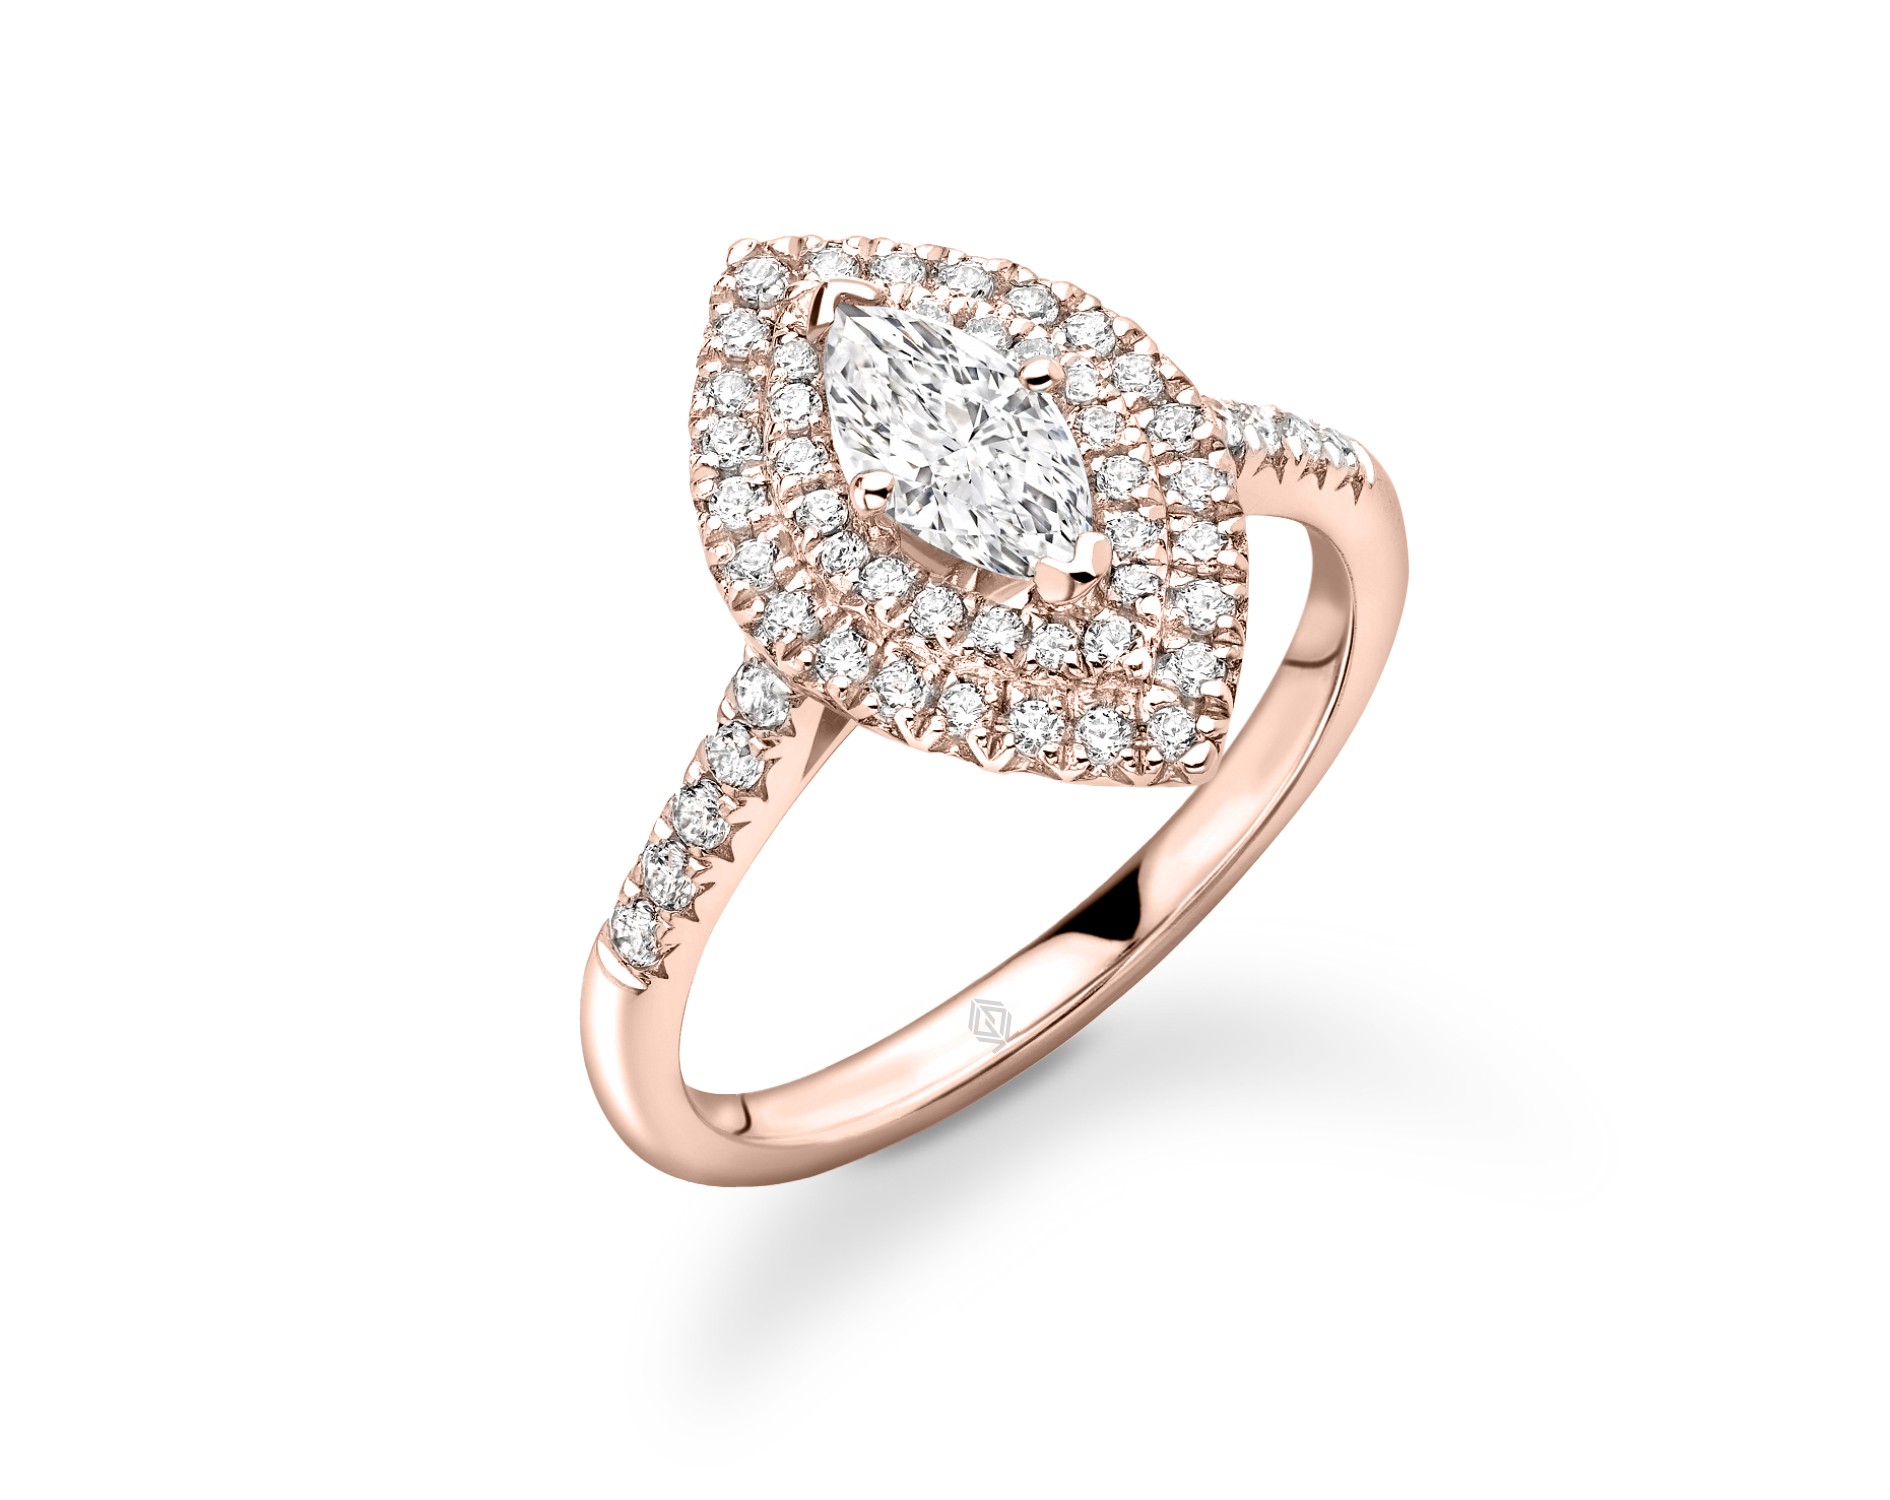 118K ROSE GOLD DOUBLE HALO MARQUISE CUT DIAMOND ENGAGEMENT RING WITH SIDE STONES PAVE SET